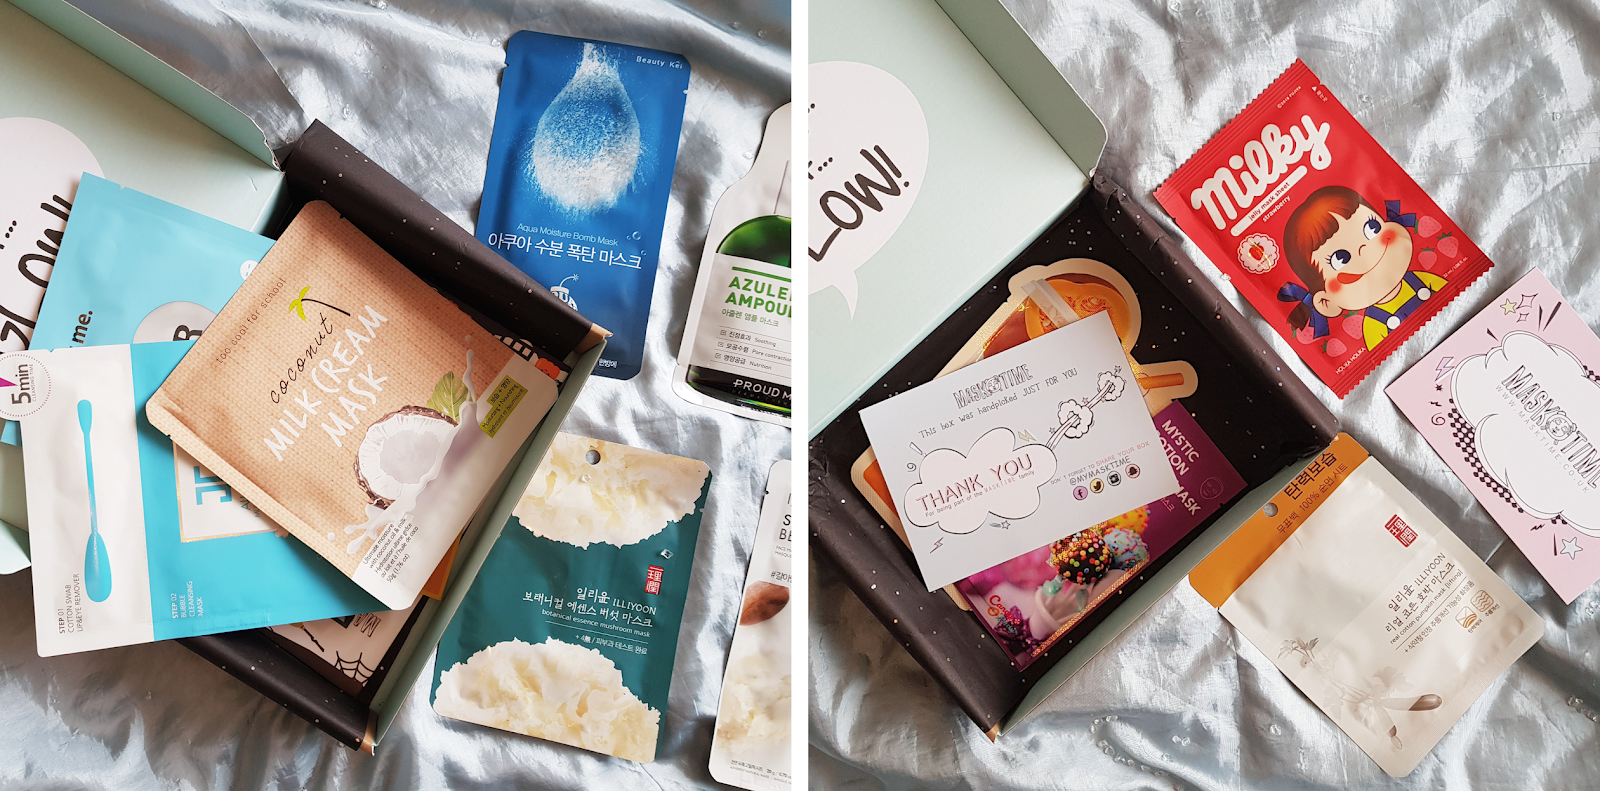 Halloween or Christmas face mask gift box from MaskTime